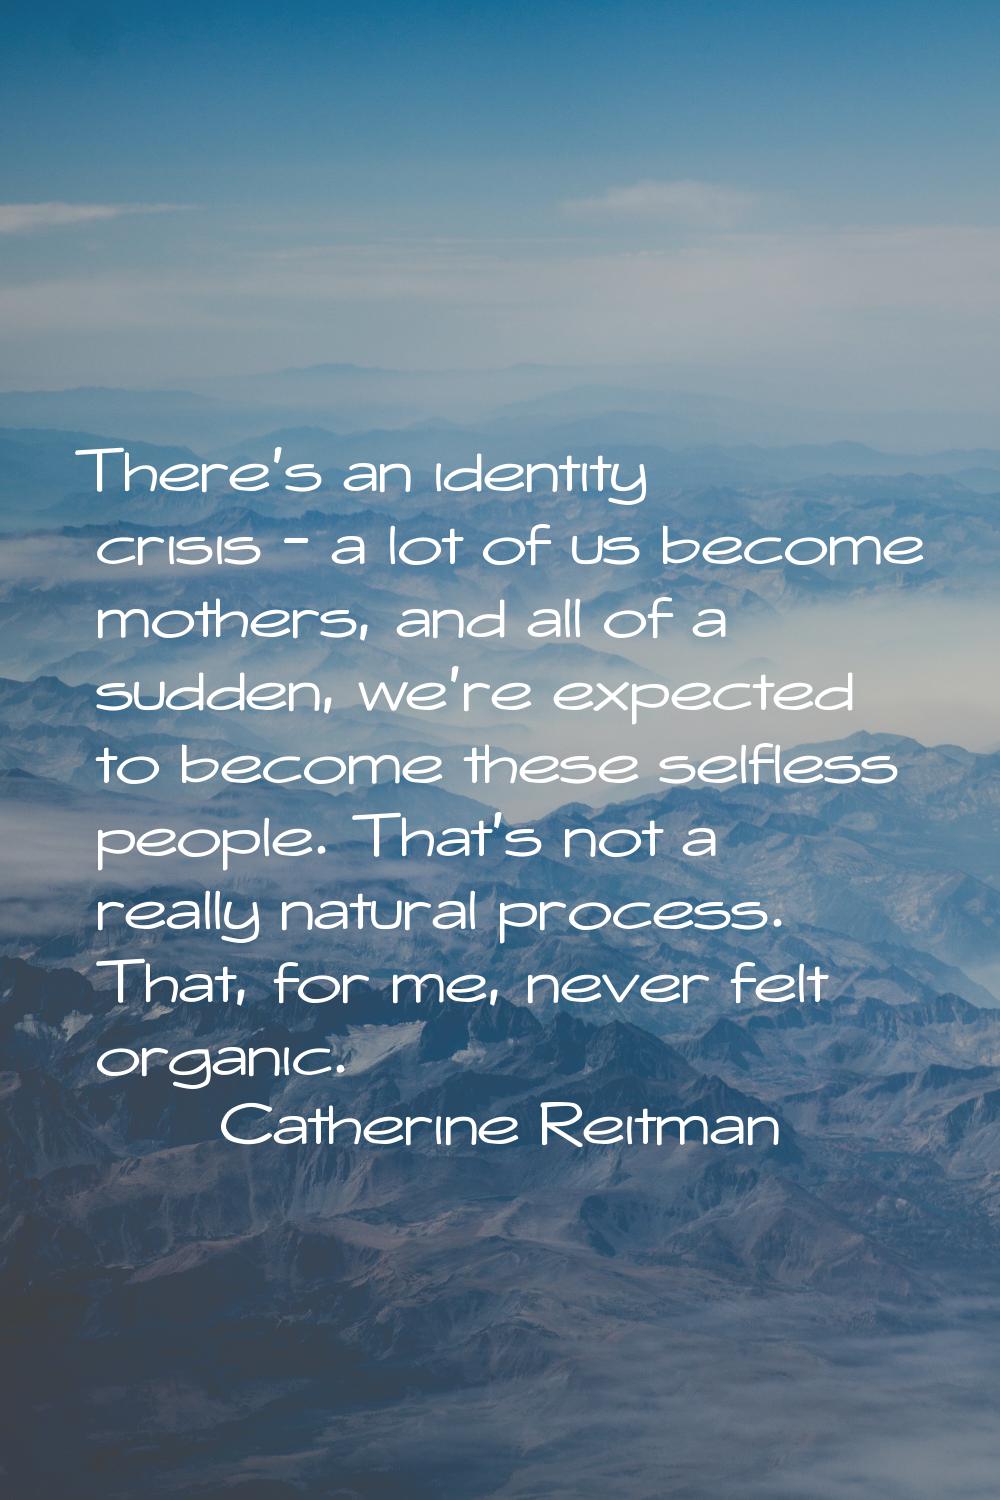 There's an identity crisis - a lot of us become mothers, and all of a sudden, we're expected to bec